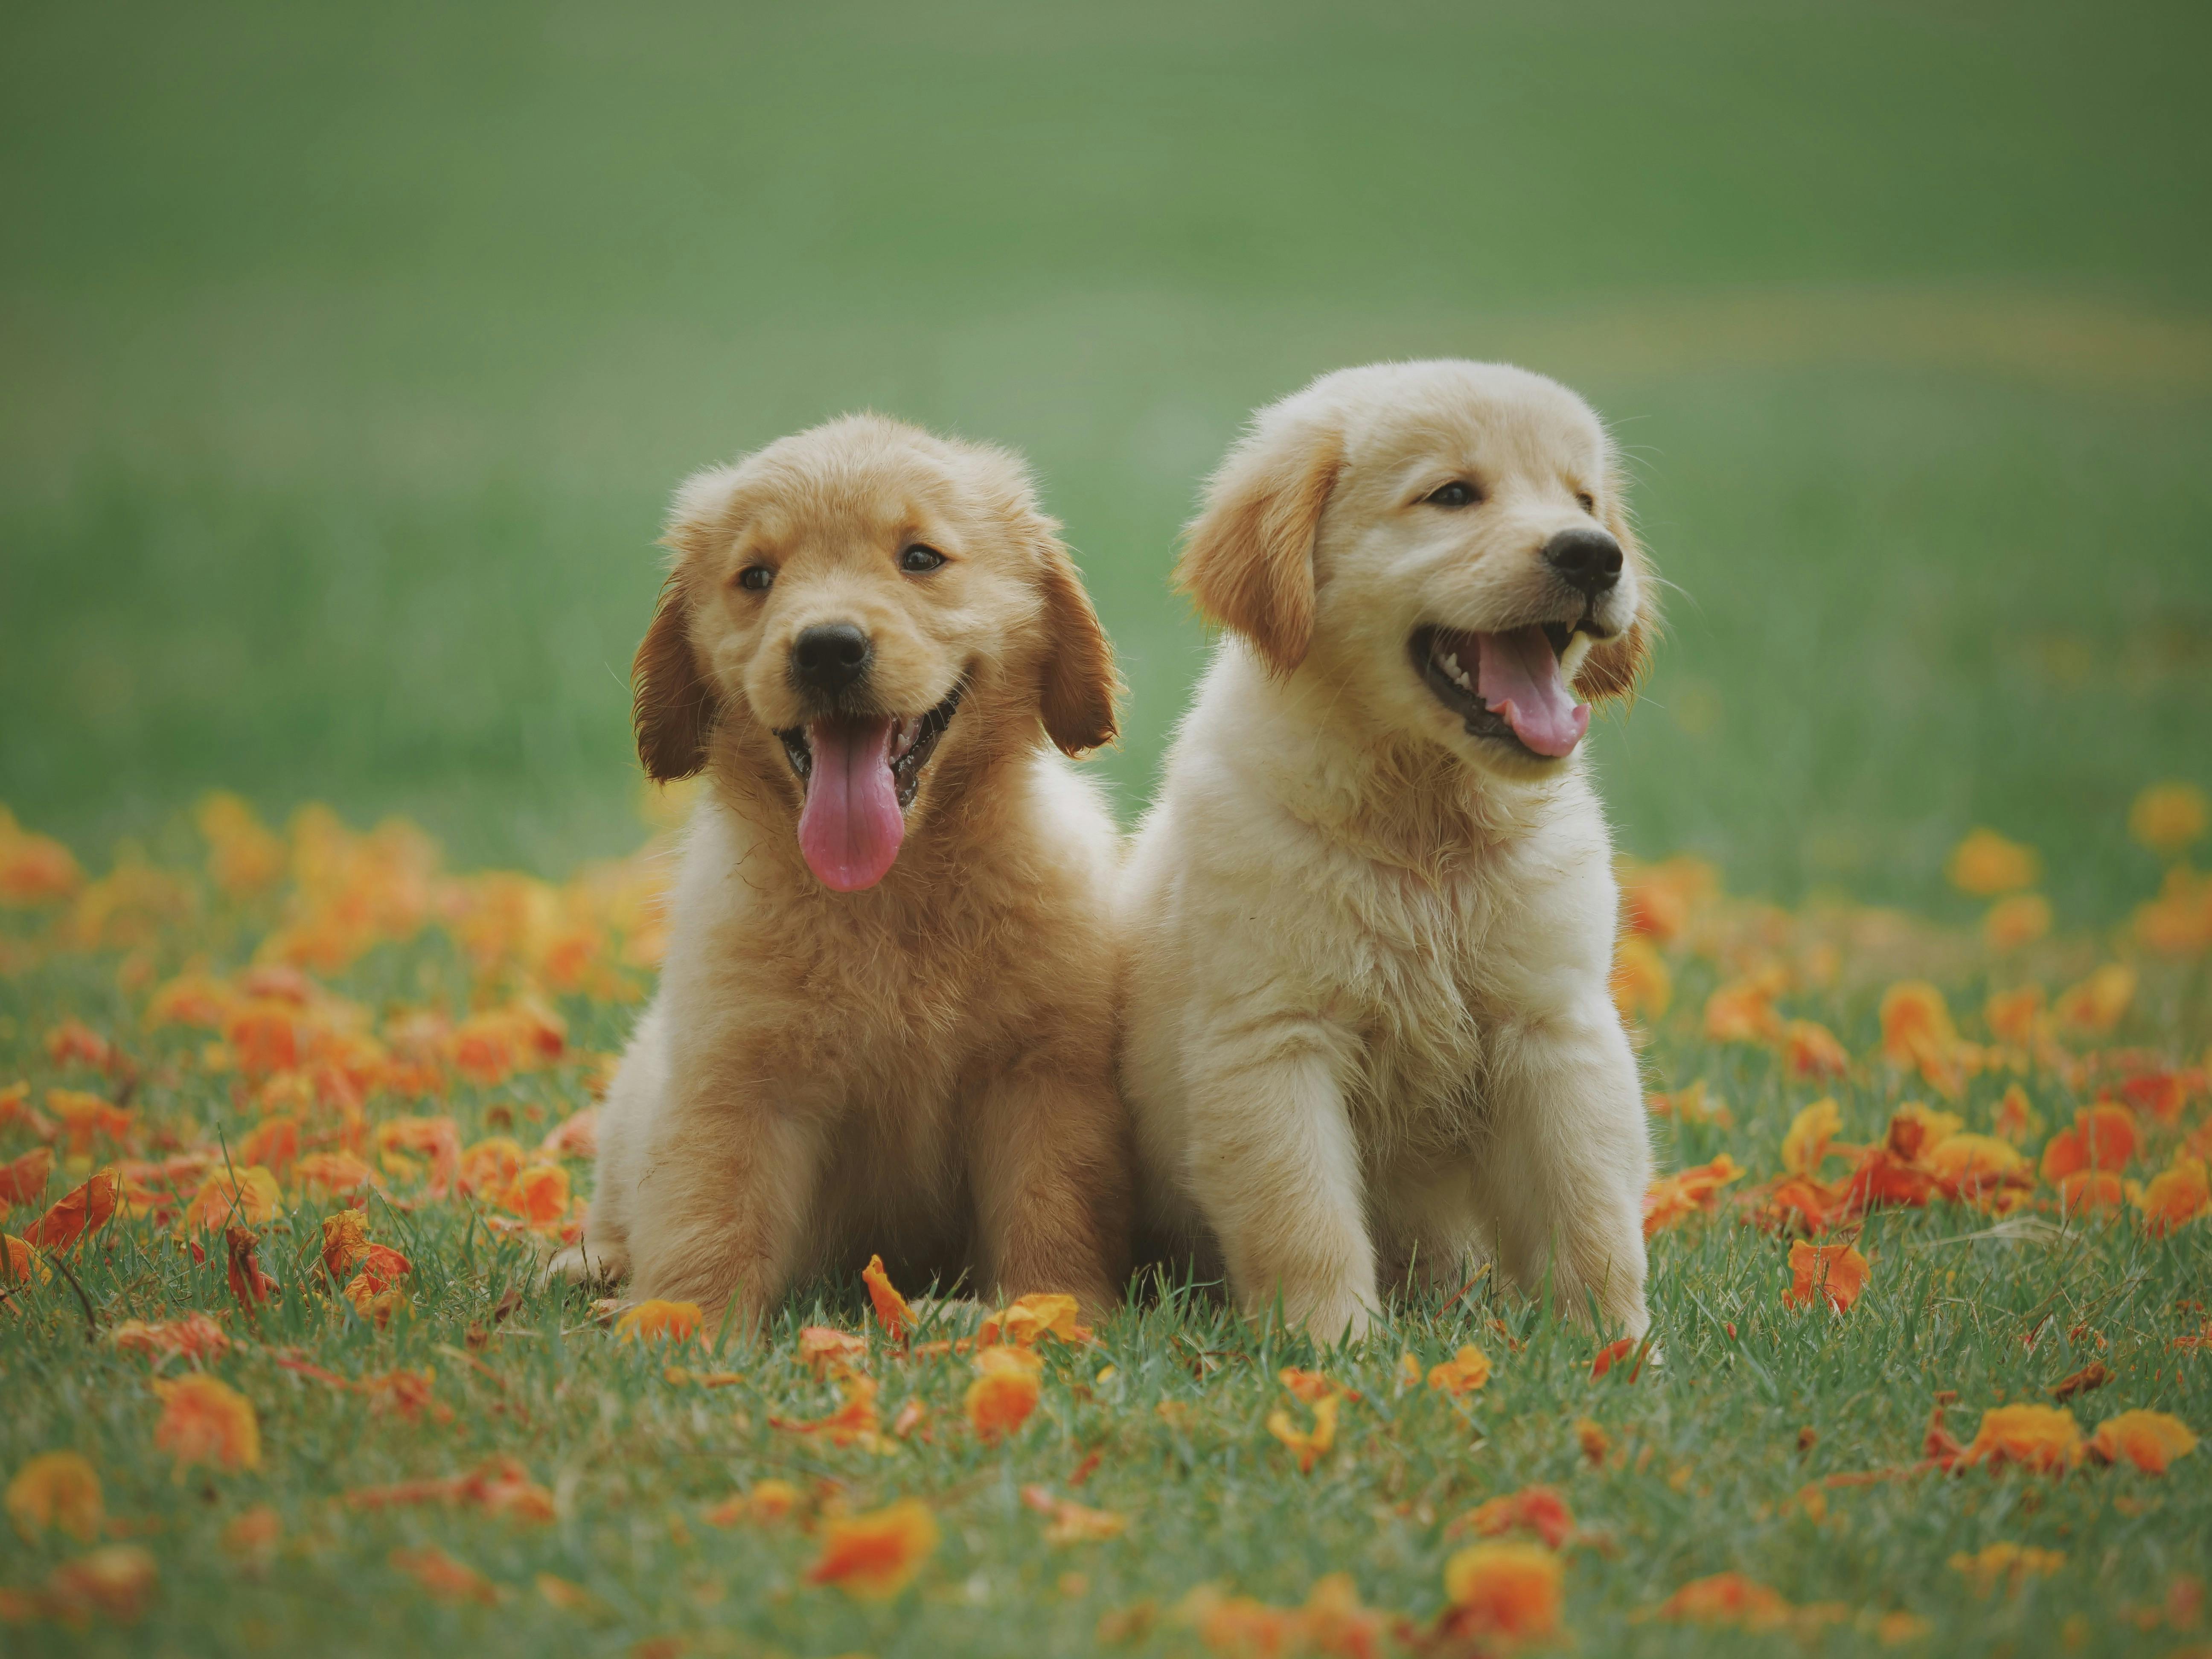 Two puppies | Source: Pexels